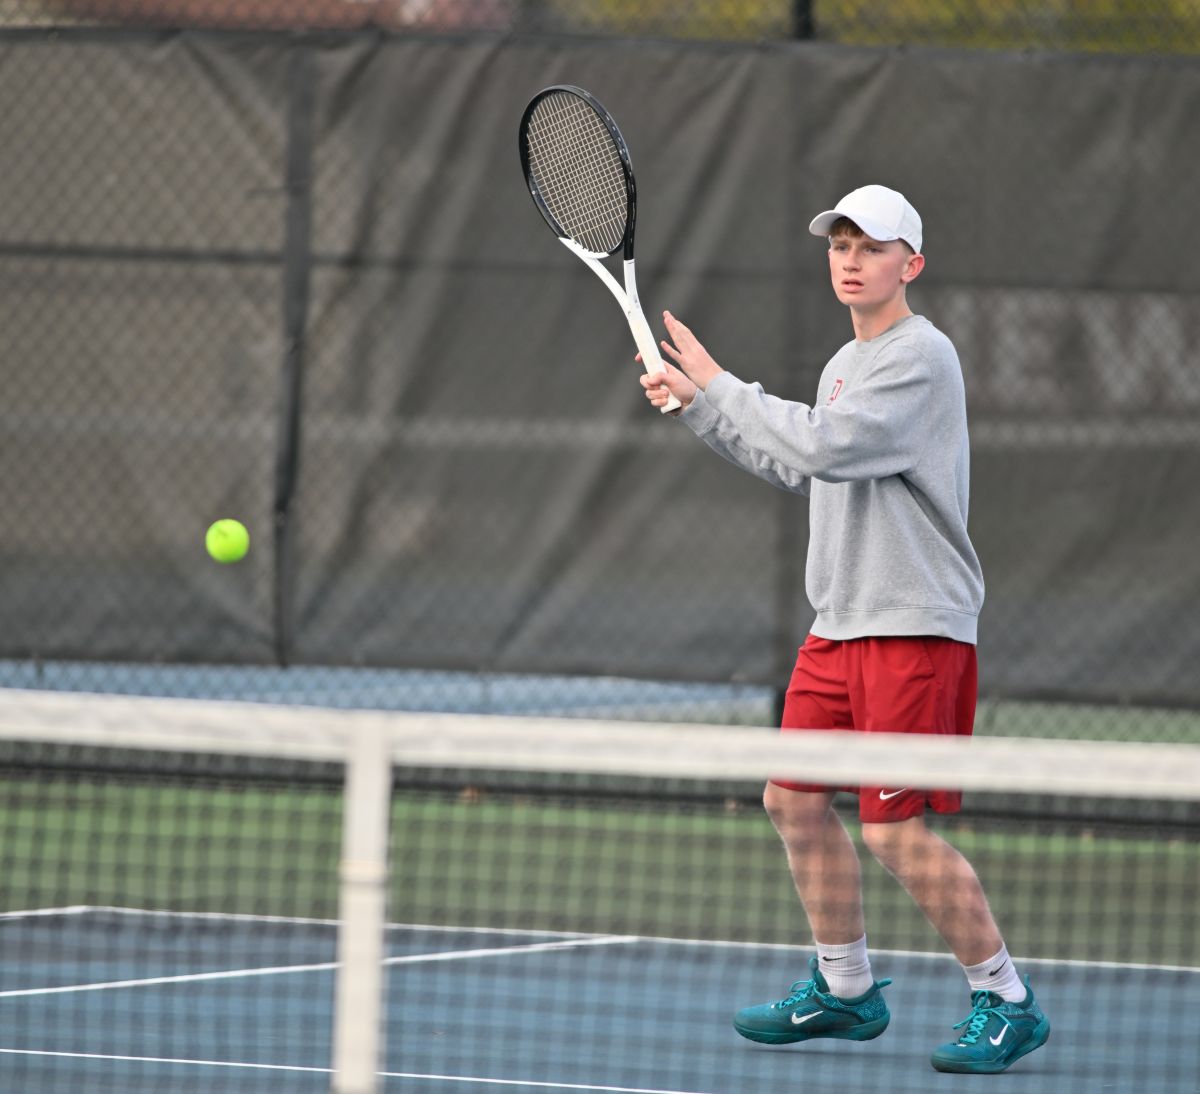 dover-at-np-tennis-4-4-24-19.jpg